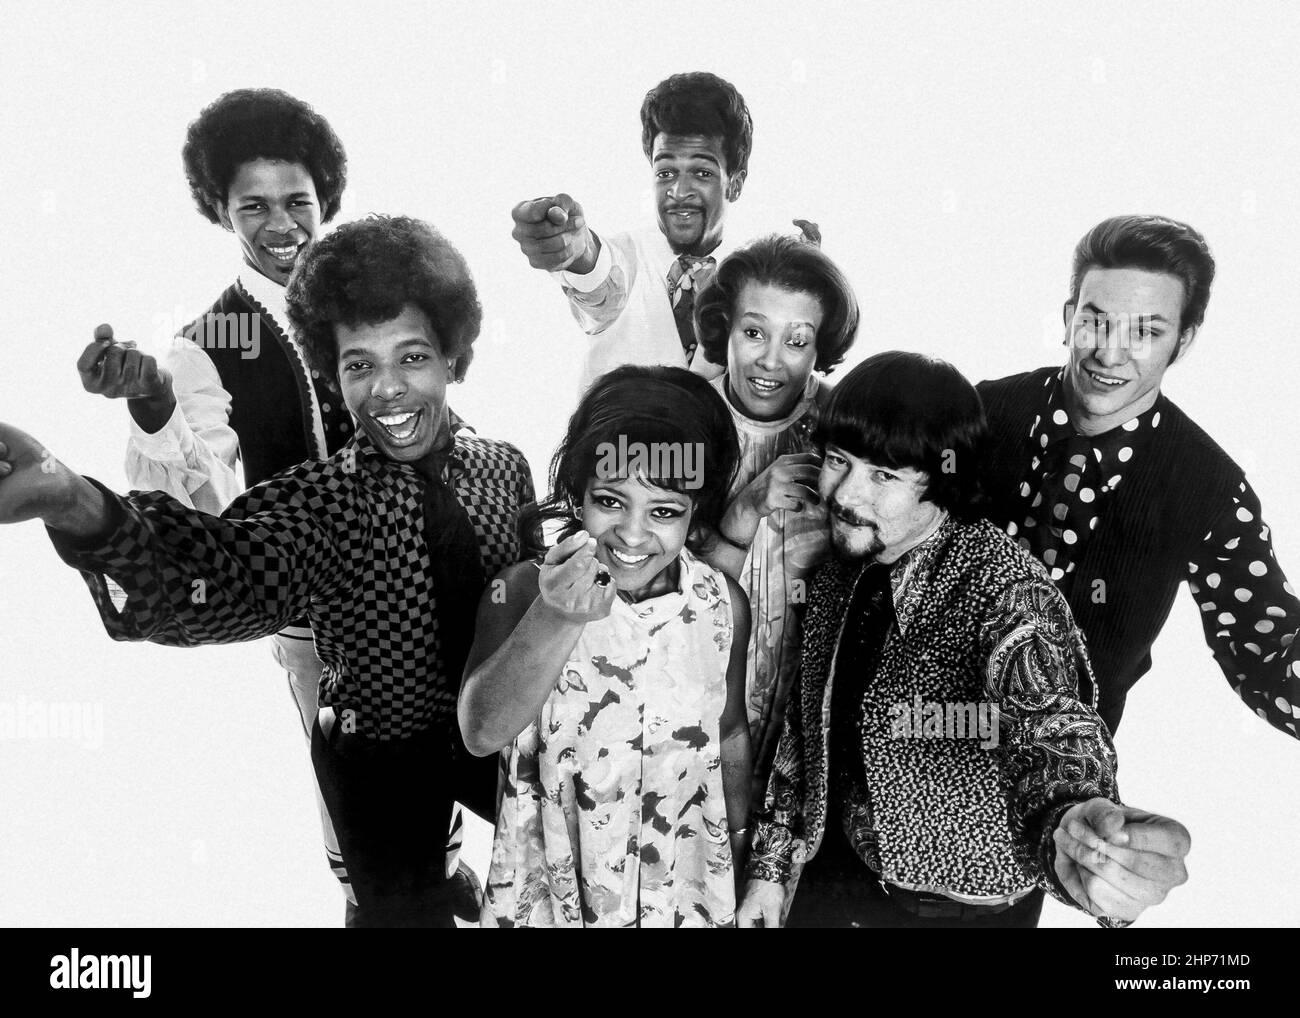 Publicity photo of the American band Sly and the Family Stone in 1968. Clockwise from top left: Freddie Stone, Sly Stone, Rose Stone, Larry Graham, Cynthia Robinson, Jerry Martini, Greg Errico Stock Photo